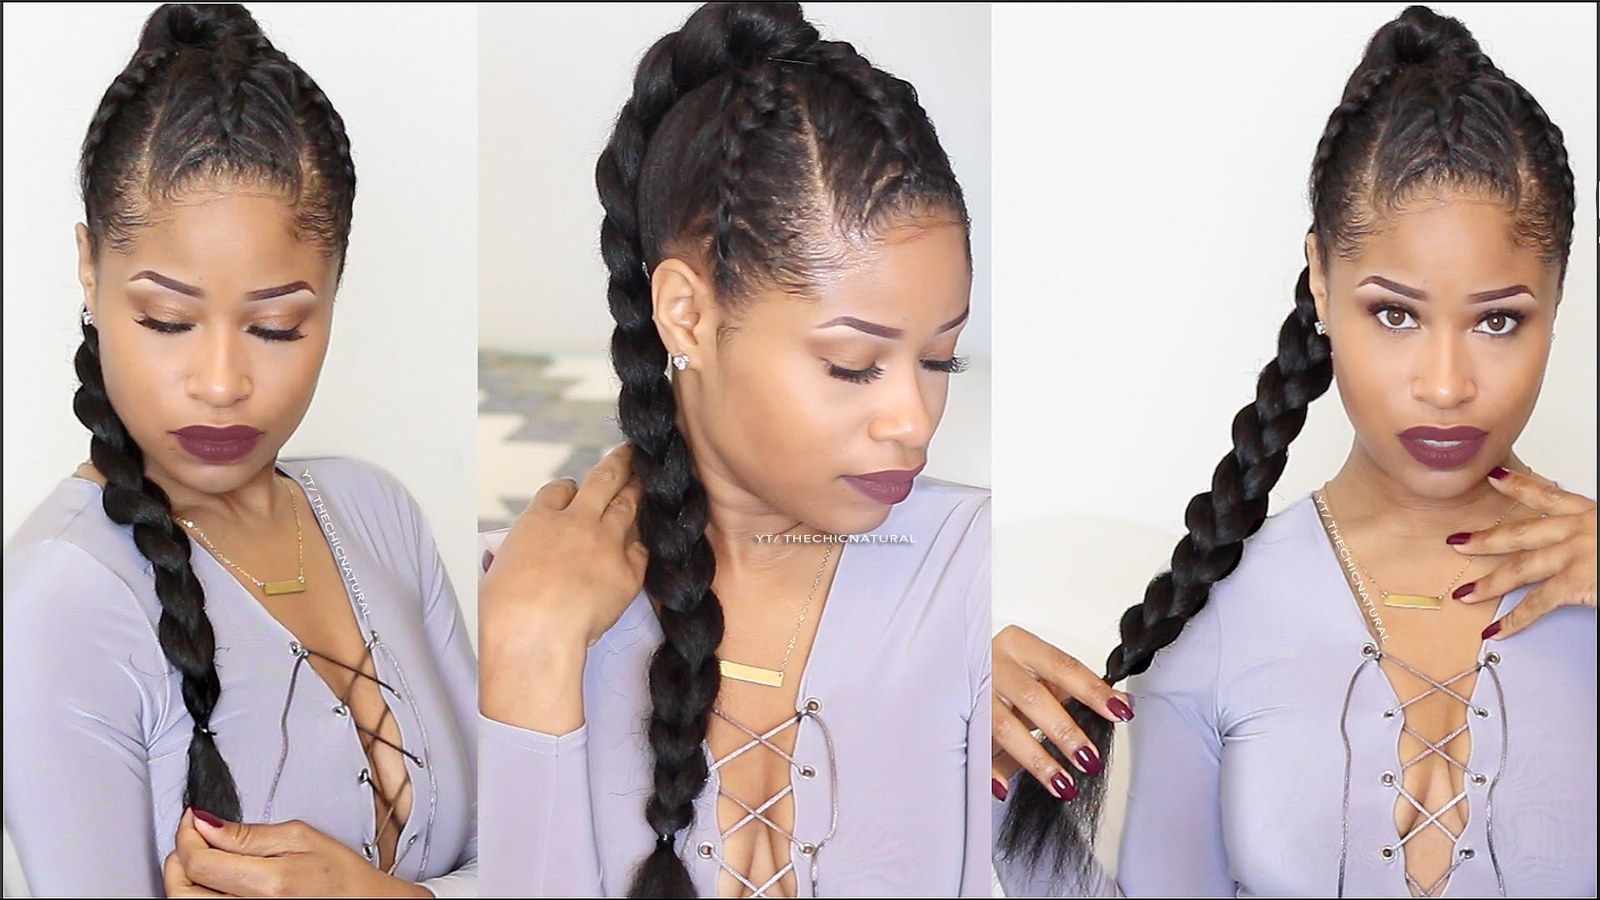 Side Part Braided Updo Protective Style Video